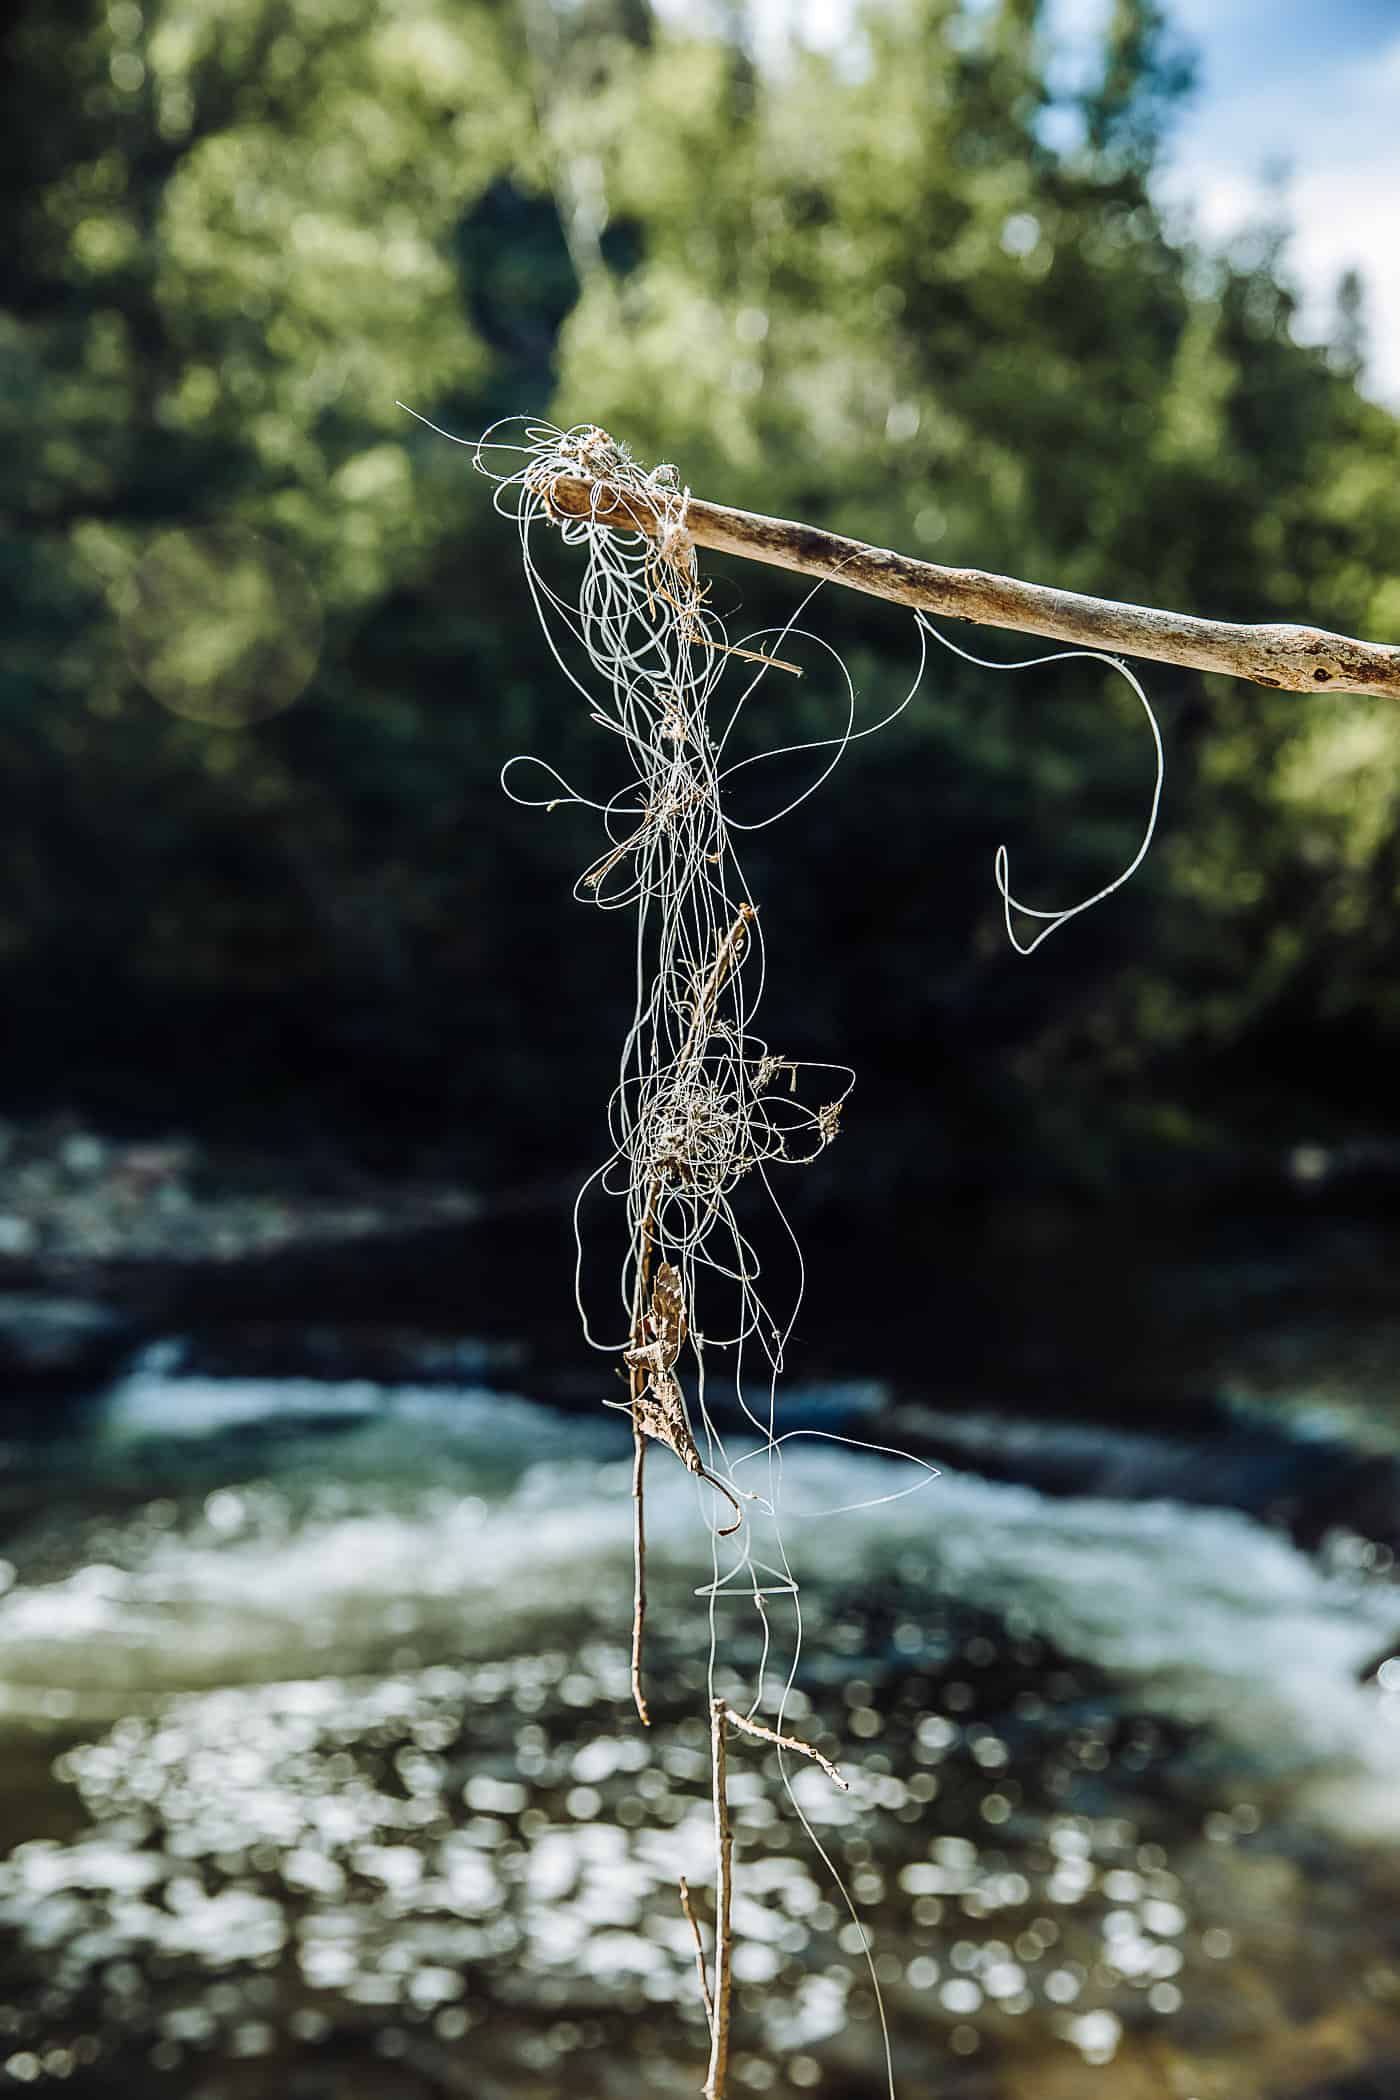 Leave No Trace Principles when Fly Fishing